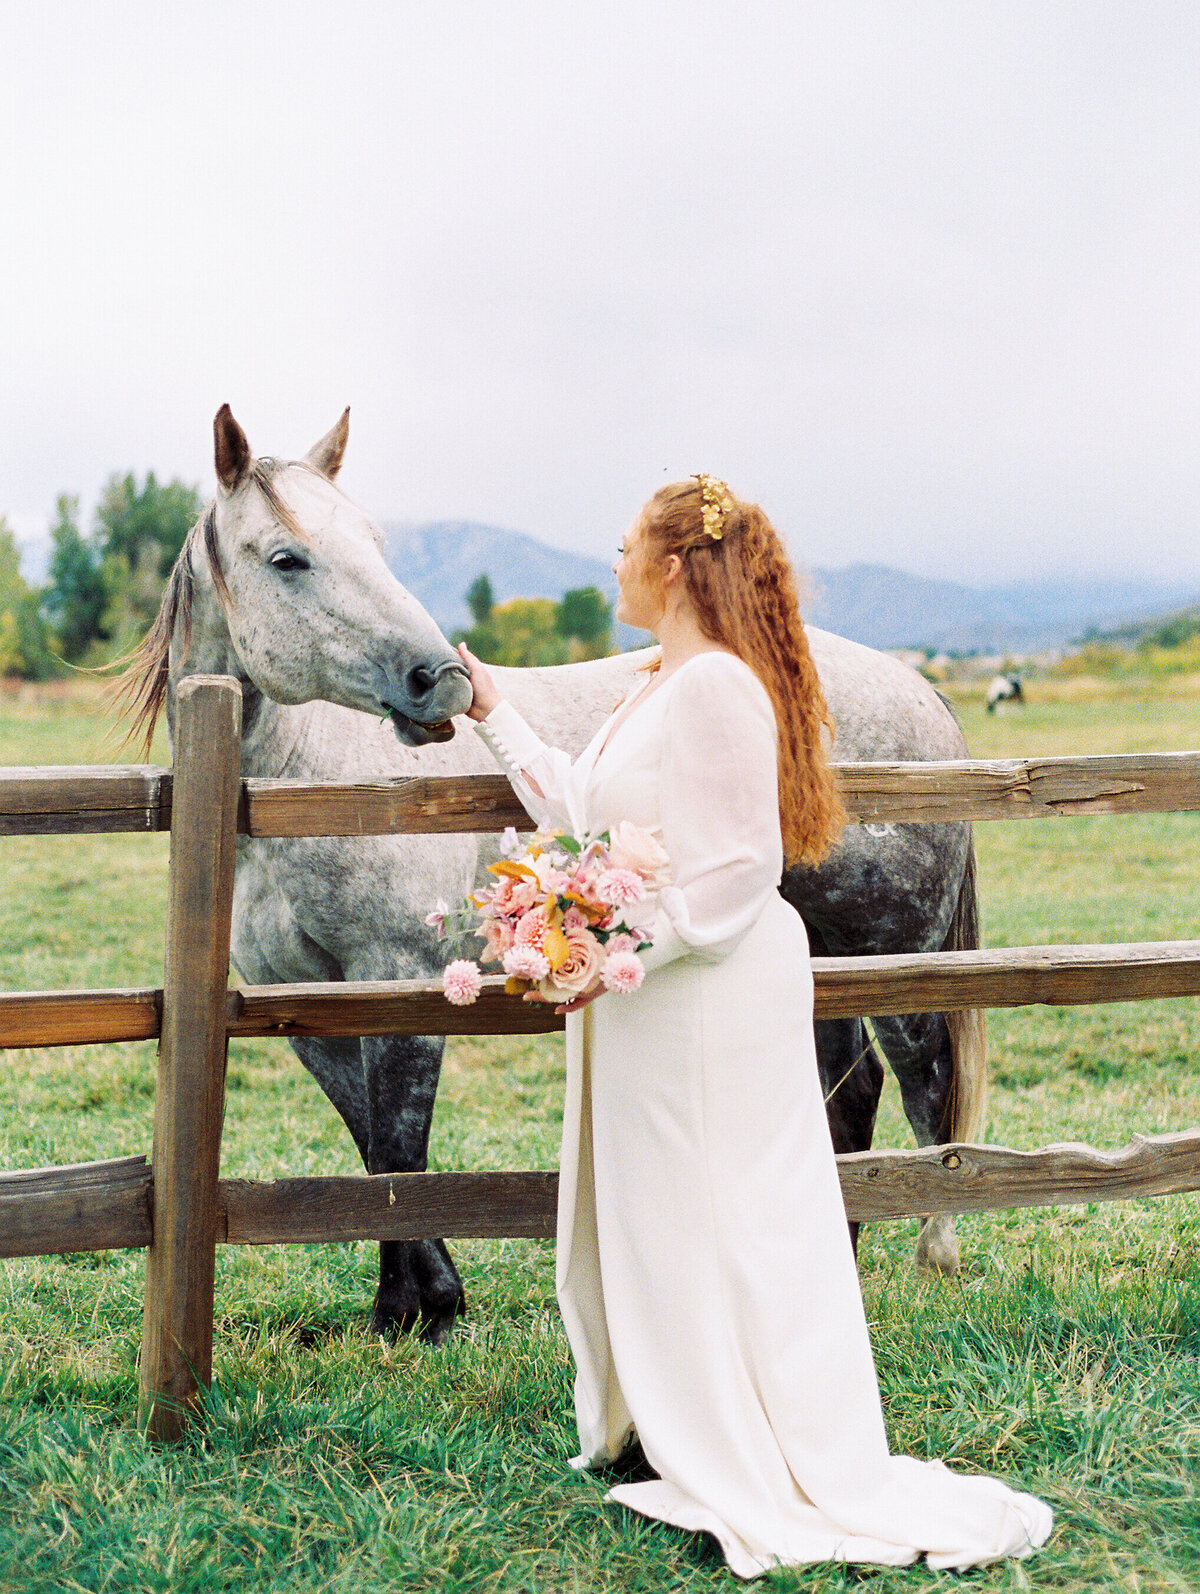 Bride caresses horse as she leans over the fence